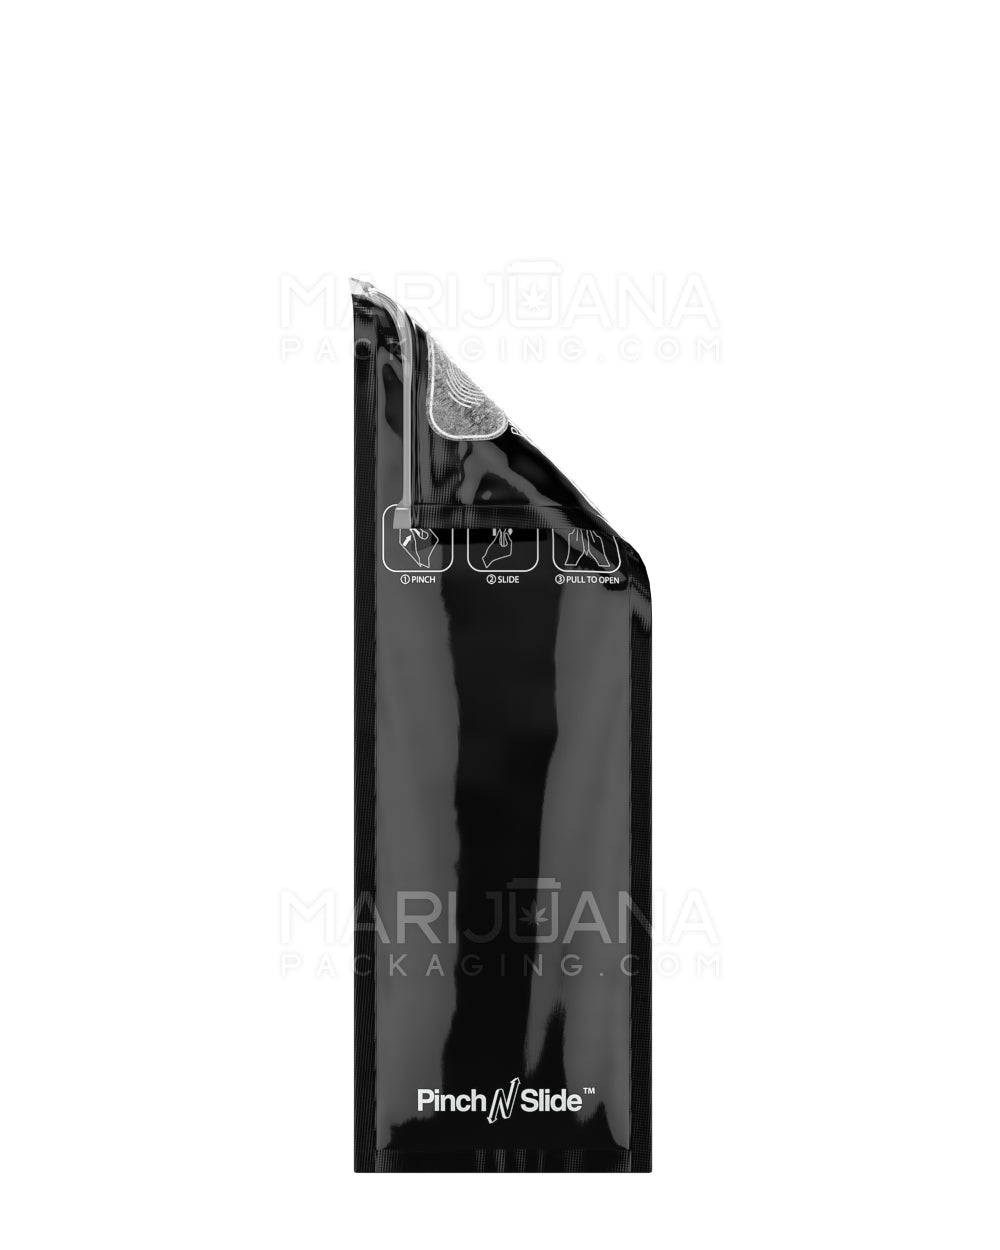 Child Resistant | Pinch N Slide ASTM Glossy Black Mylar Bags | 2.4in x 7.2in - 2.5g - 250 Count - 3